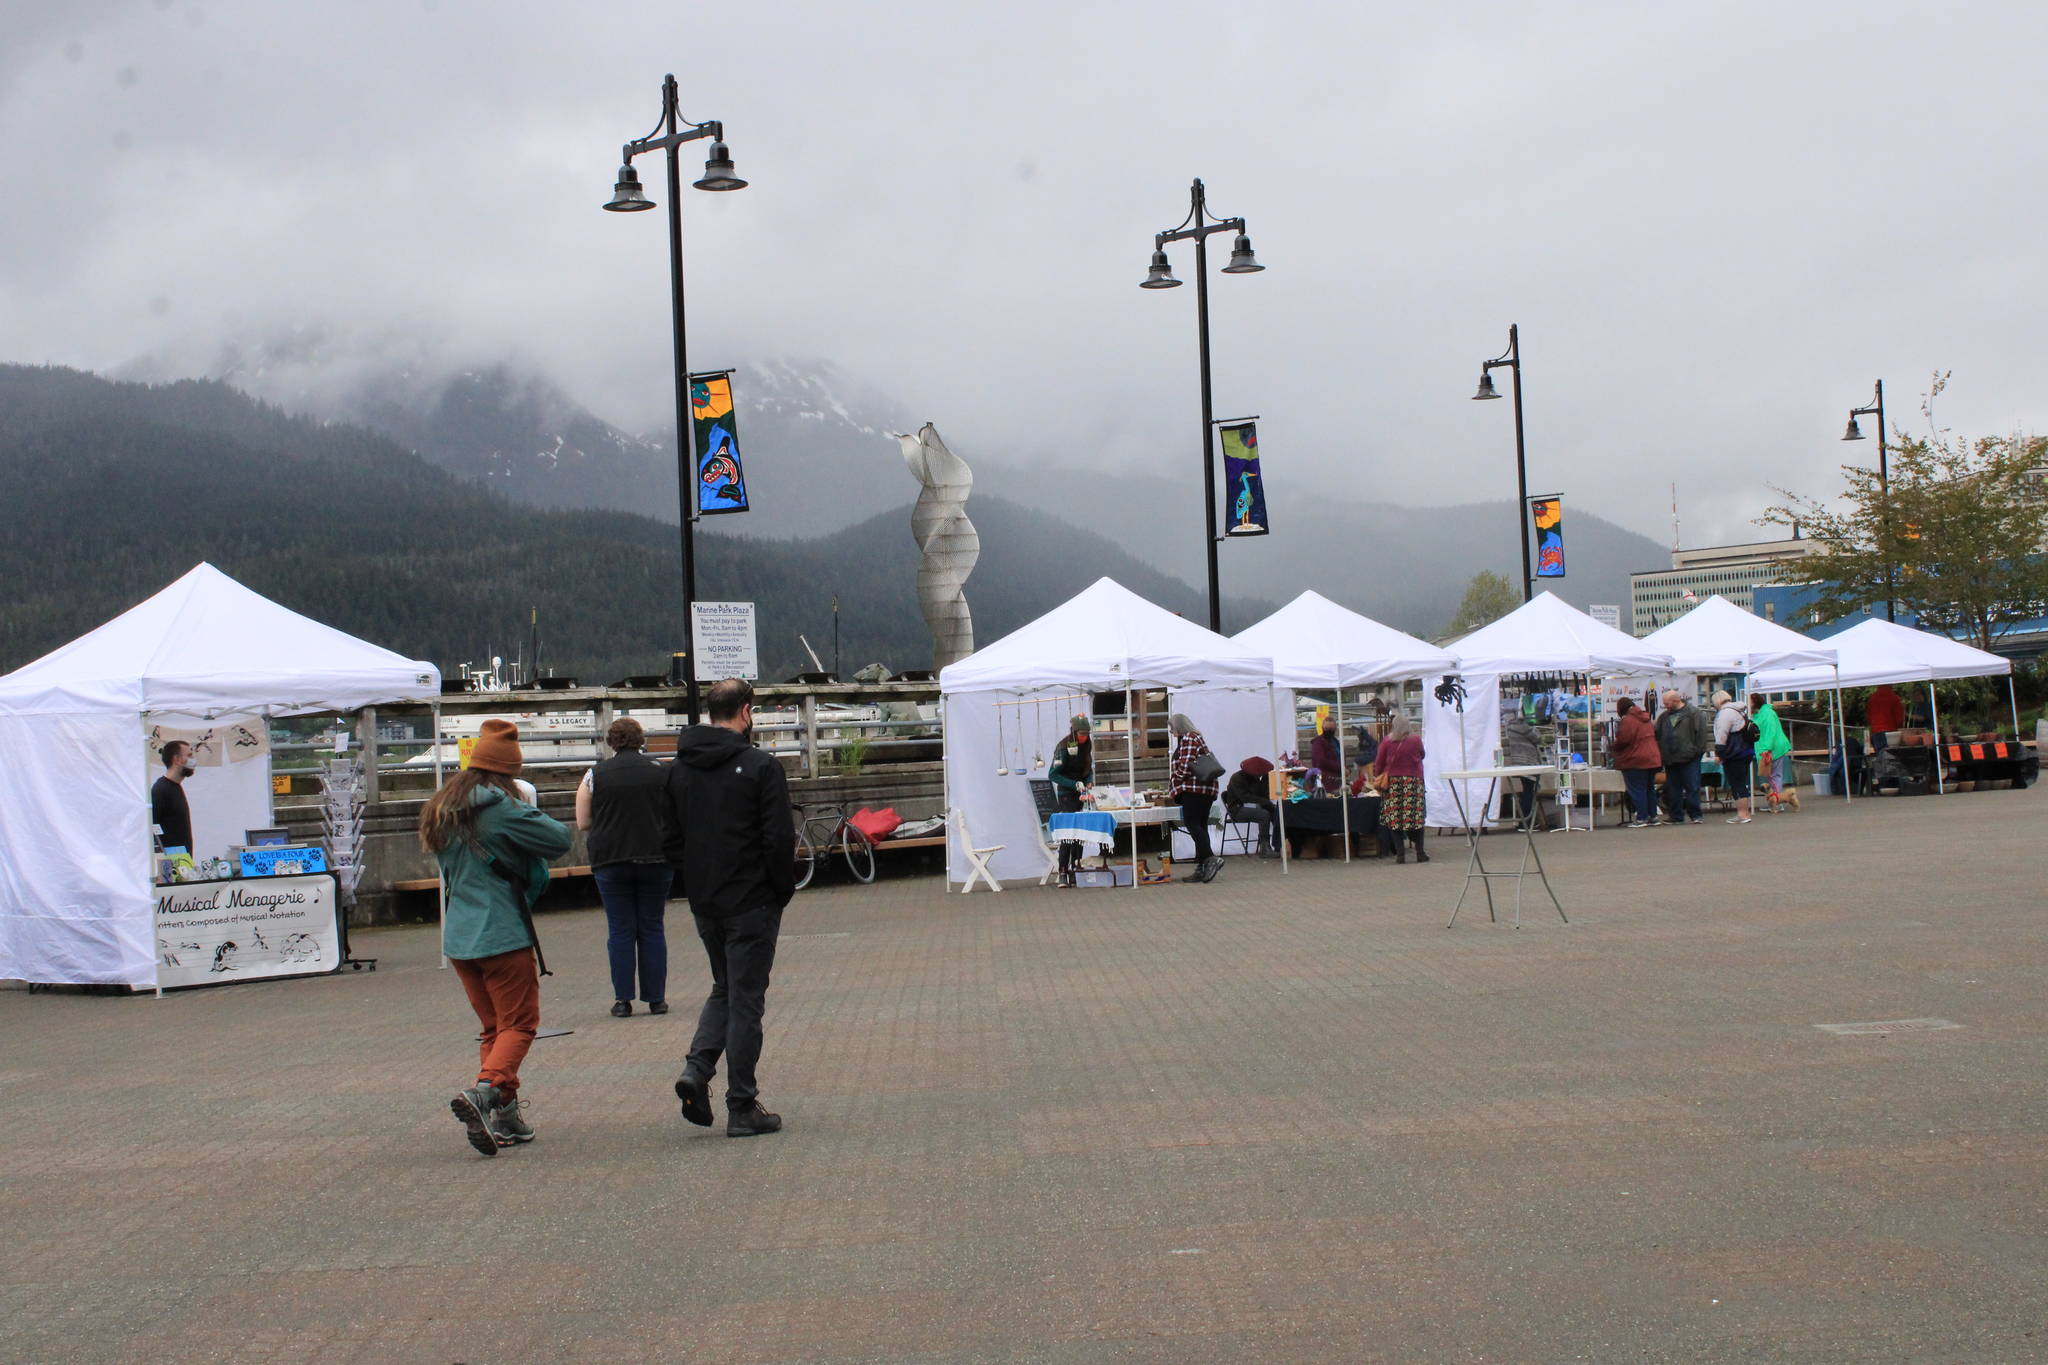 Shoppers strolled along the tents downtown on Saturday, June 5, checking out the wares of local artists. Across town, shoppers popped into a community-wide garage sale held at the Switzer Village Recreation Hall to benefit the Helping Hands Food Bank. (Dana Zigmund/Juneau Empire)